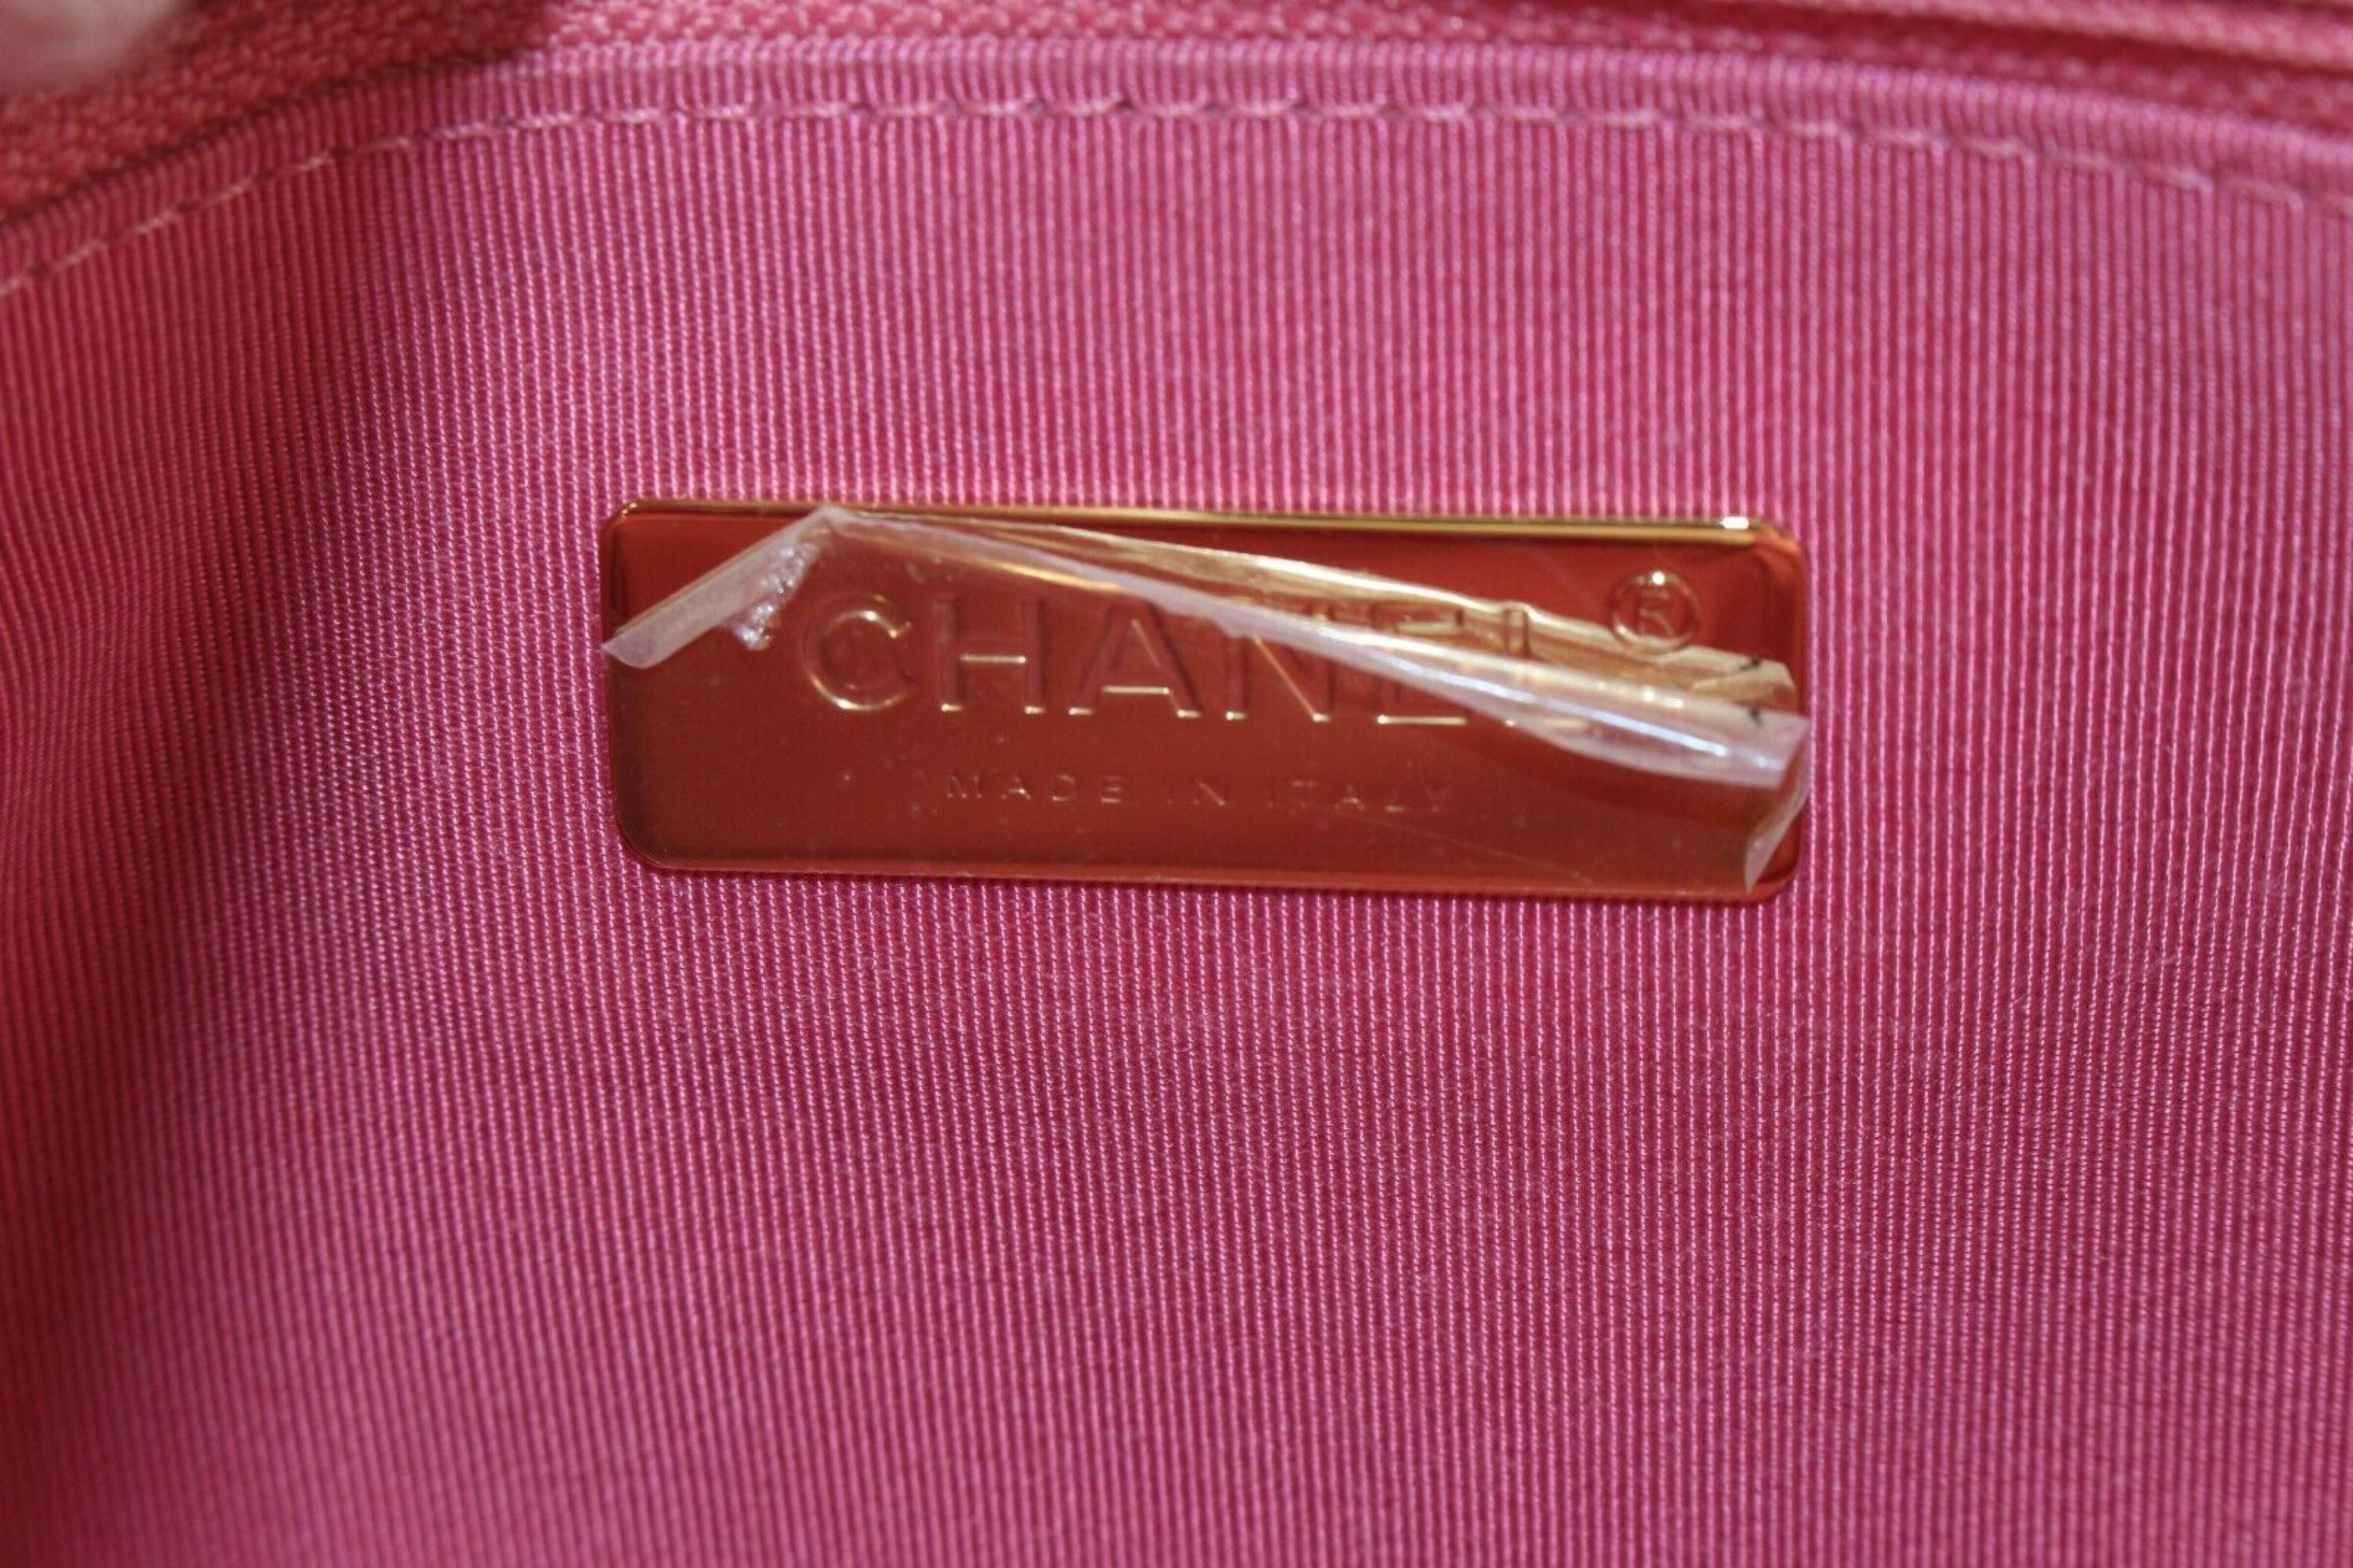 Chanel Quilted Bubble Gum Pink Medium 19 Flap 1CAS418C
Date Code/Serial Number: 31228388

Made In: Italy

Measurements: Length:  11